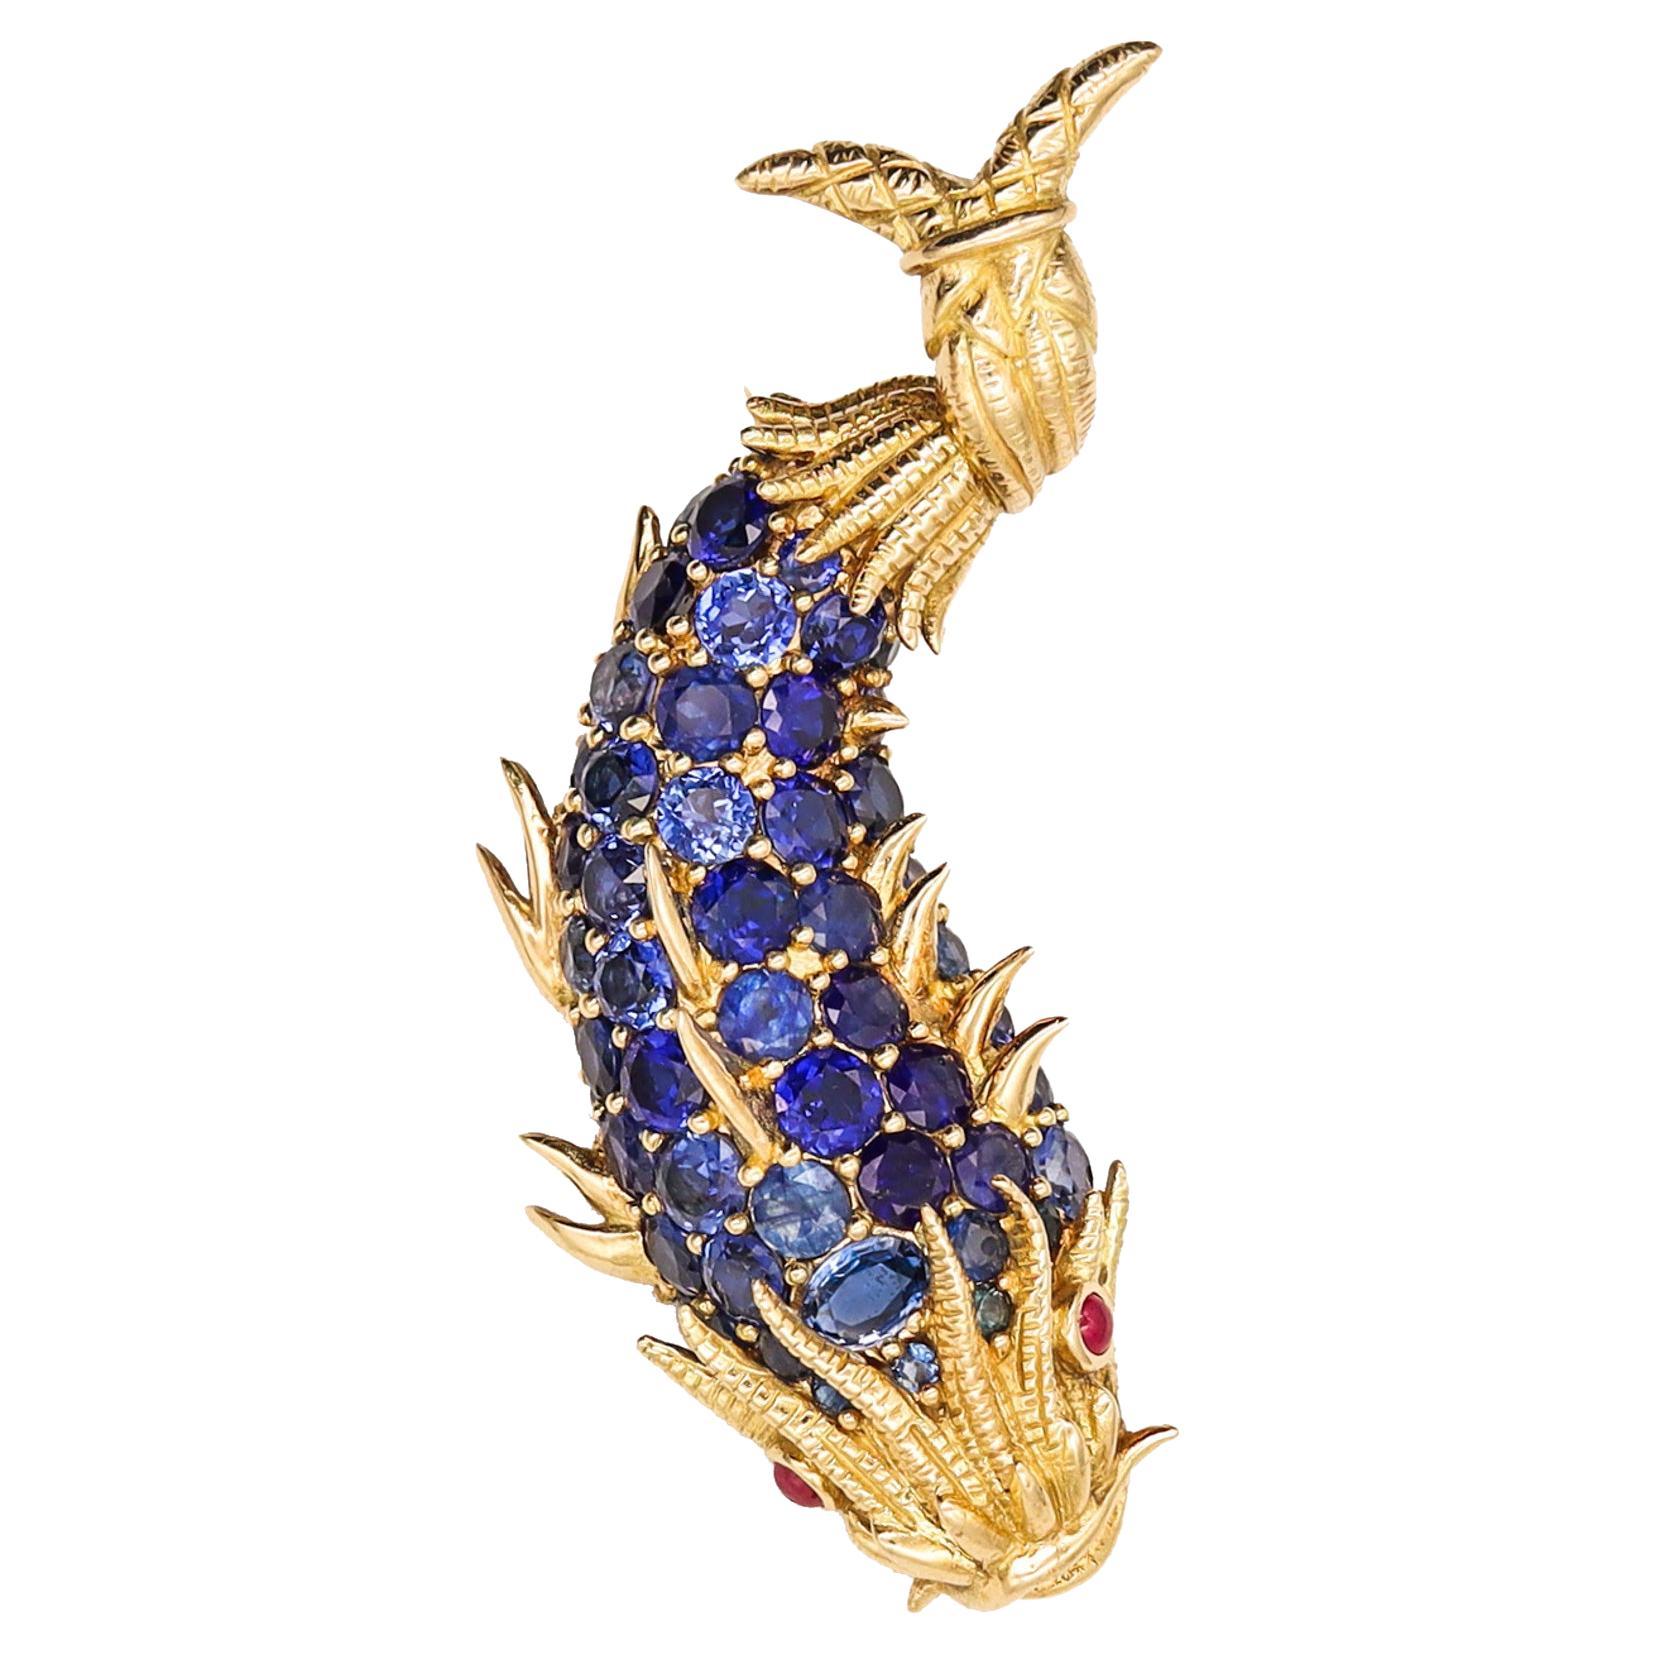 Tiffany & Co 1968 Mythological Fish Brooch in 18kt Gold with 60.05 Ctw Sapphires For Sale